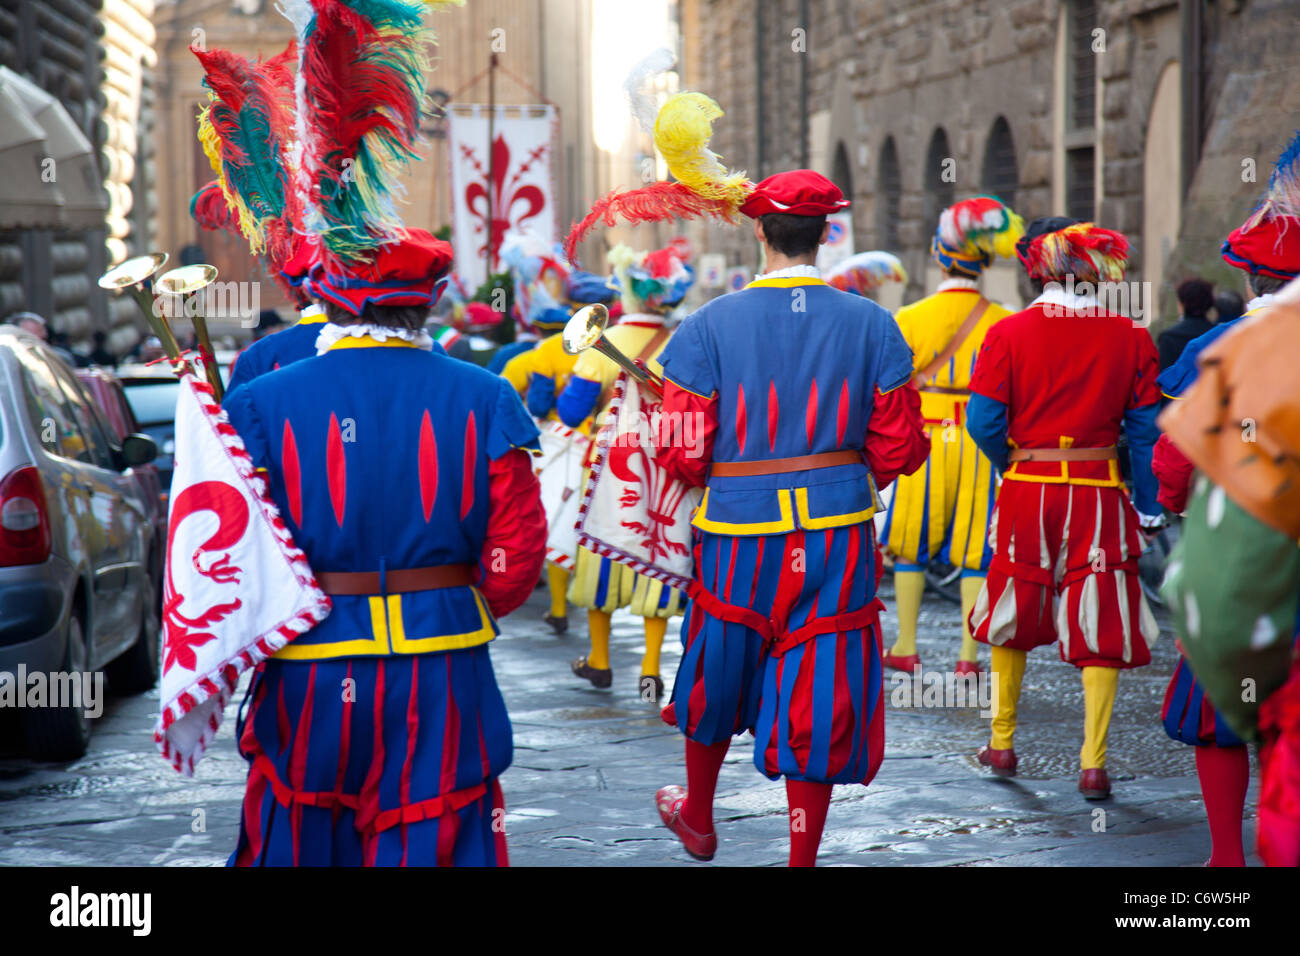 Parade by men in traditional costume through the streets of Florence